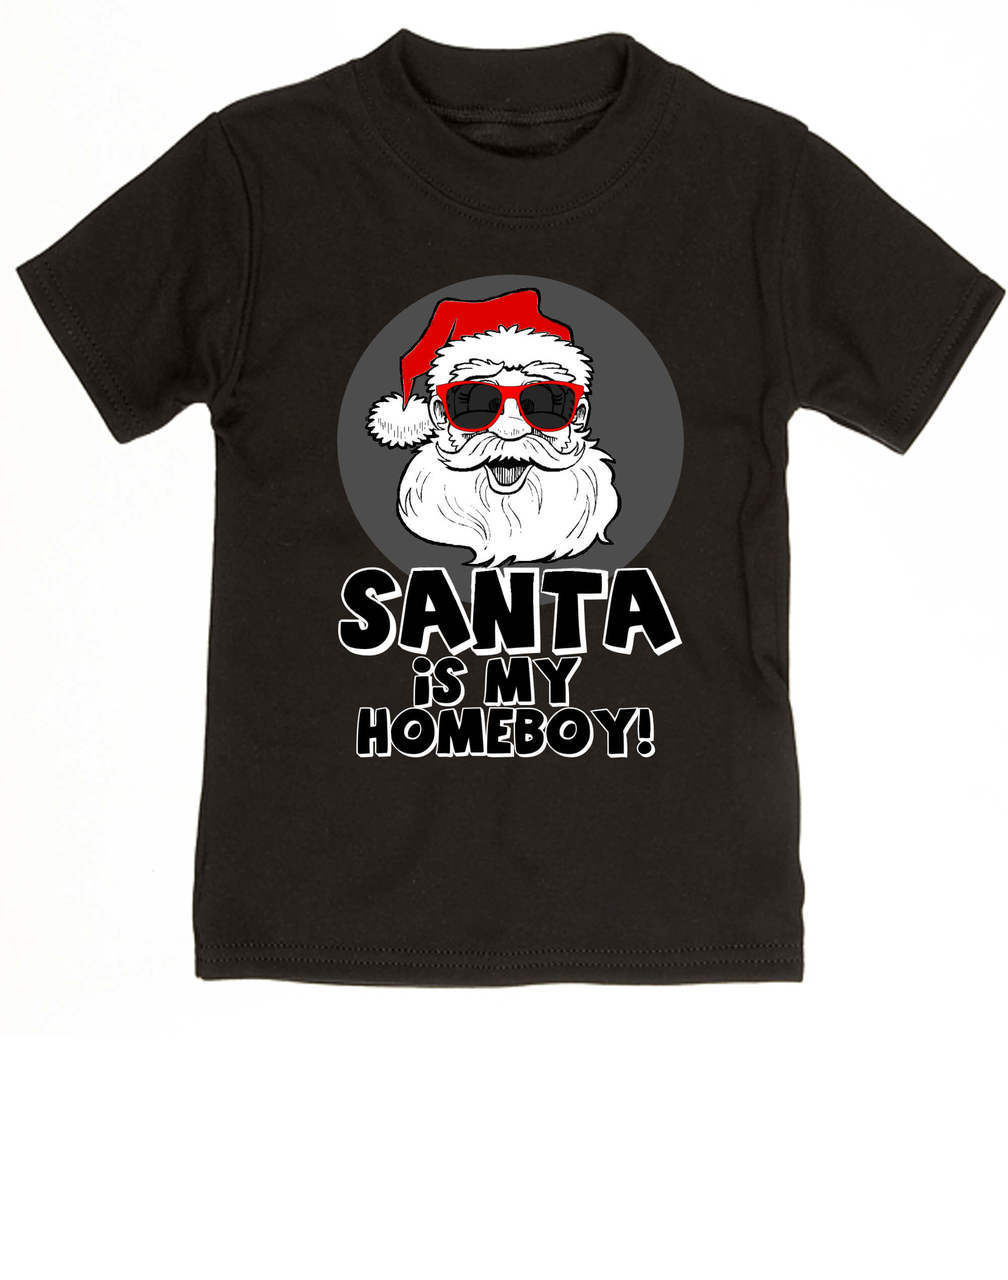 Santa is My Homeboy - baby onesie and toddler shirt